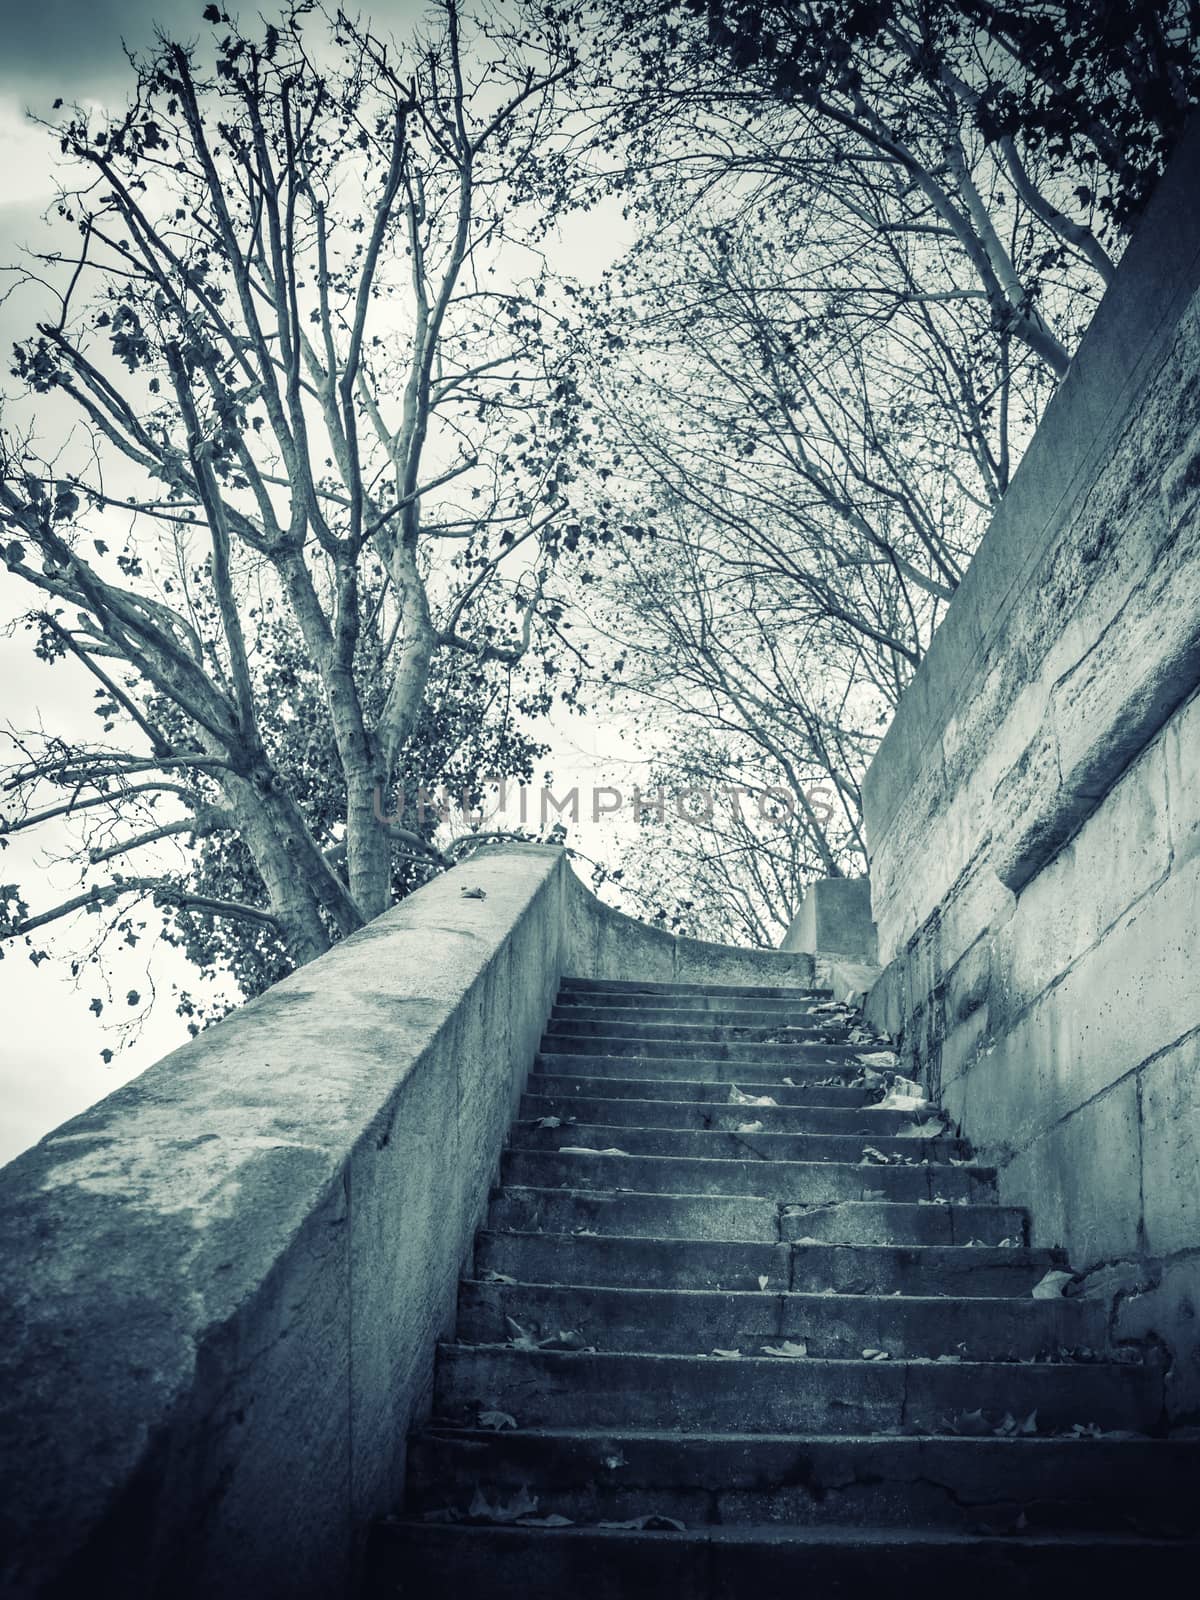 Stairs by the Seine river in Paris by Netfalls